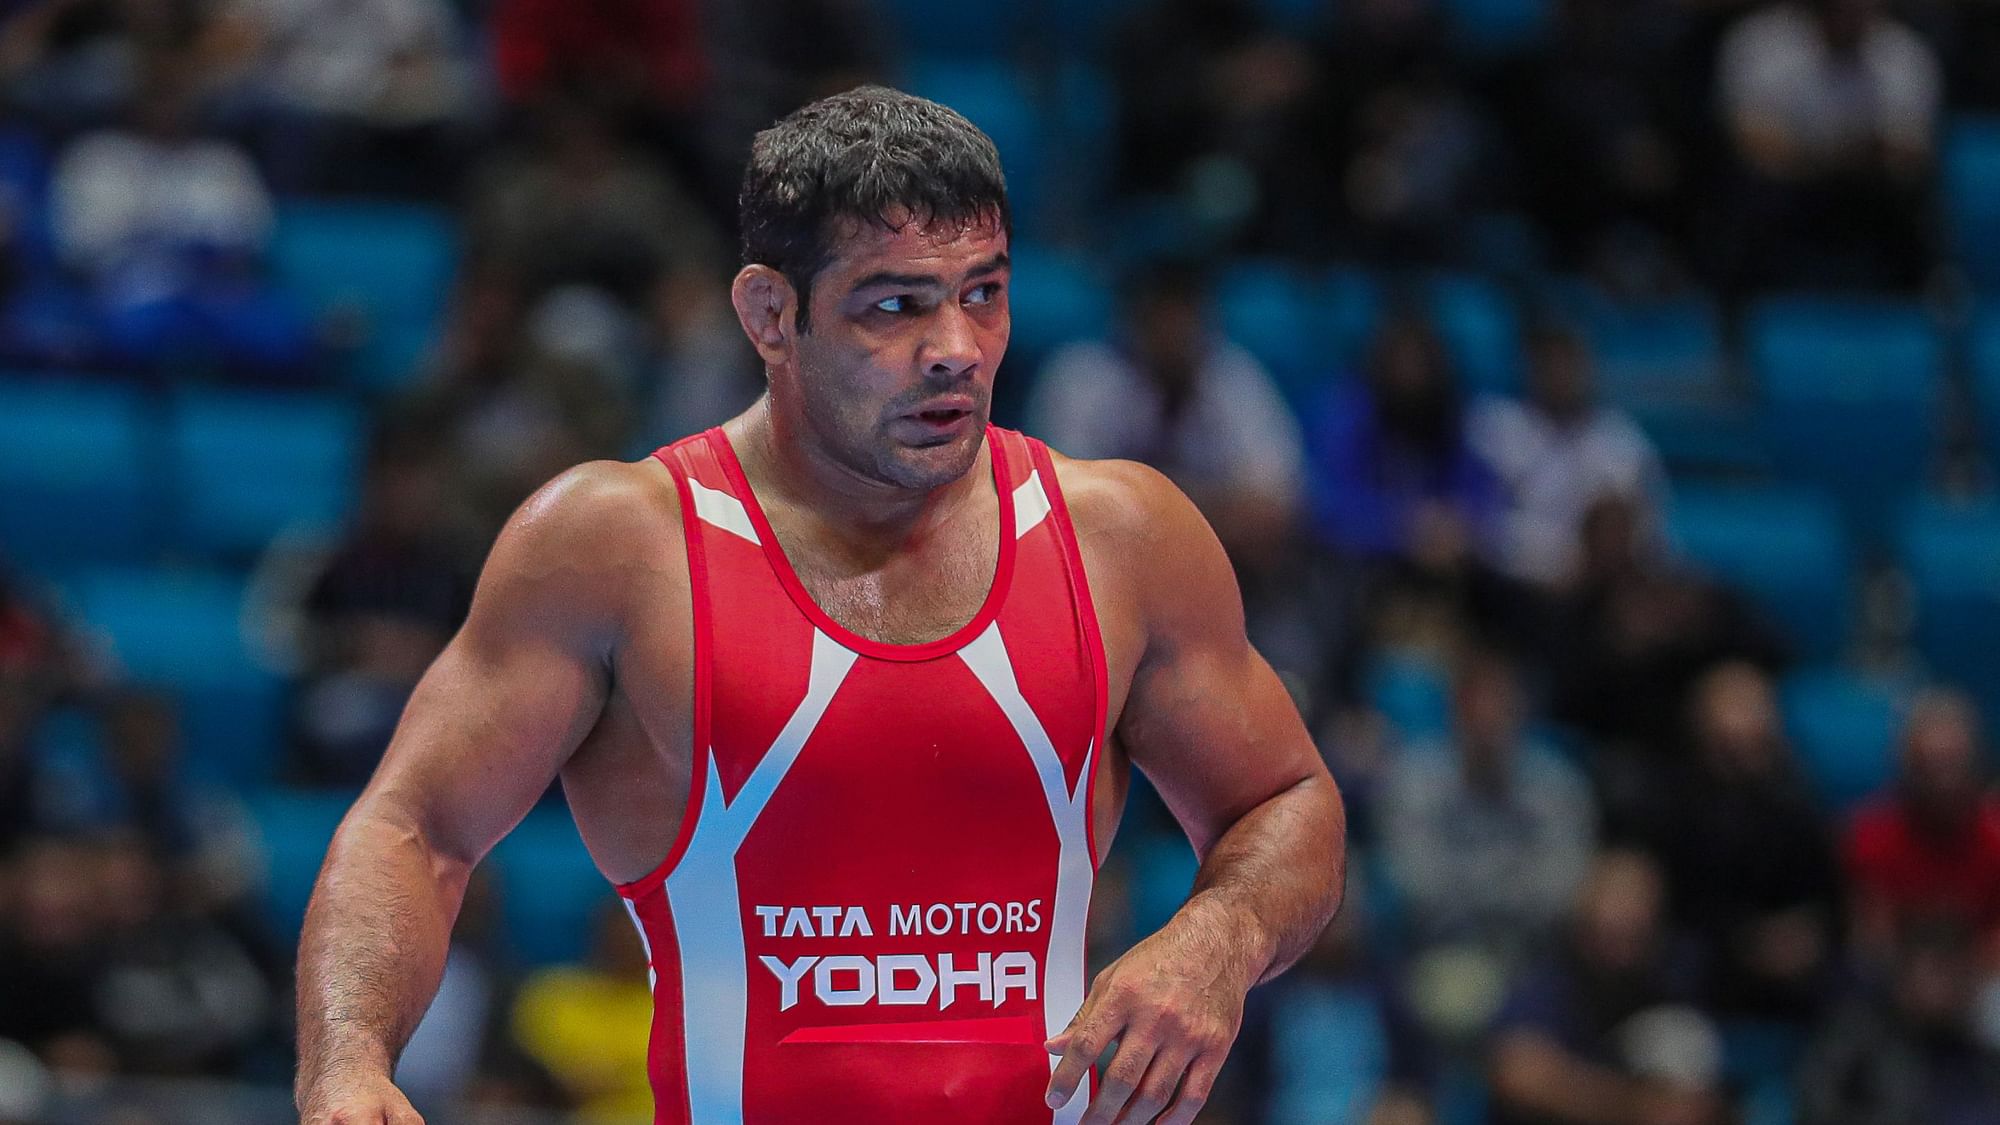 Sushil Kumar’s request for a postponement of his category’s trial has been rejected by the WFI.